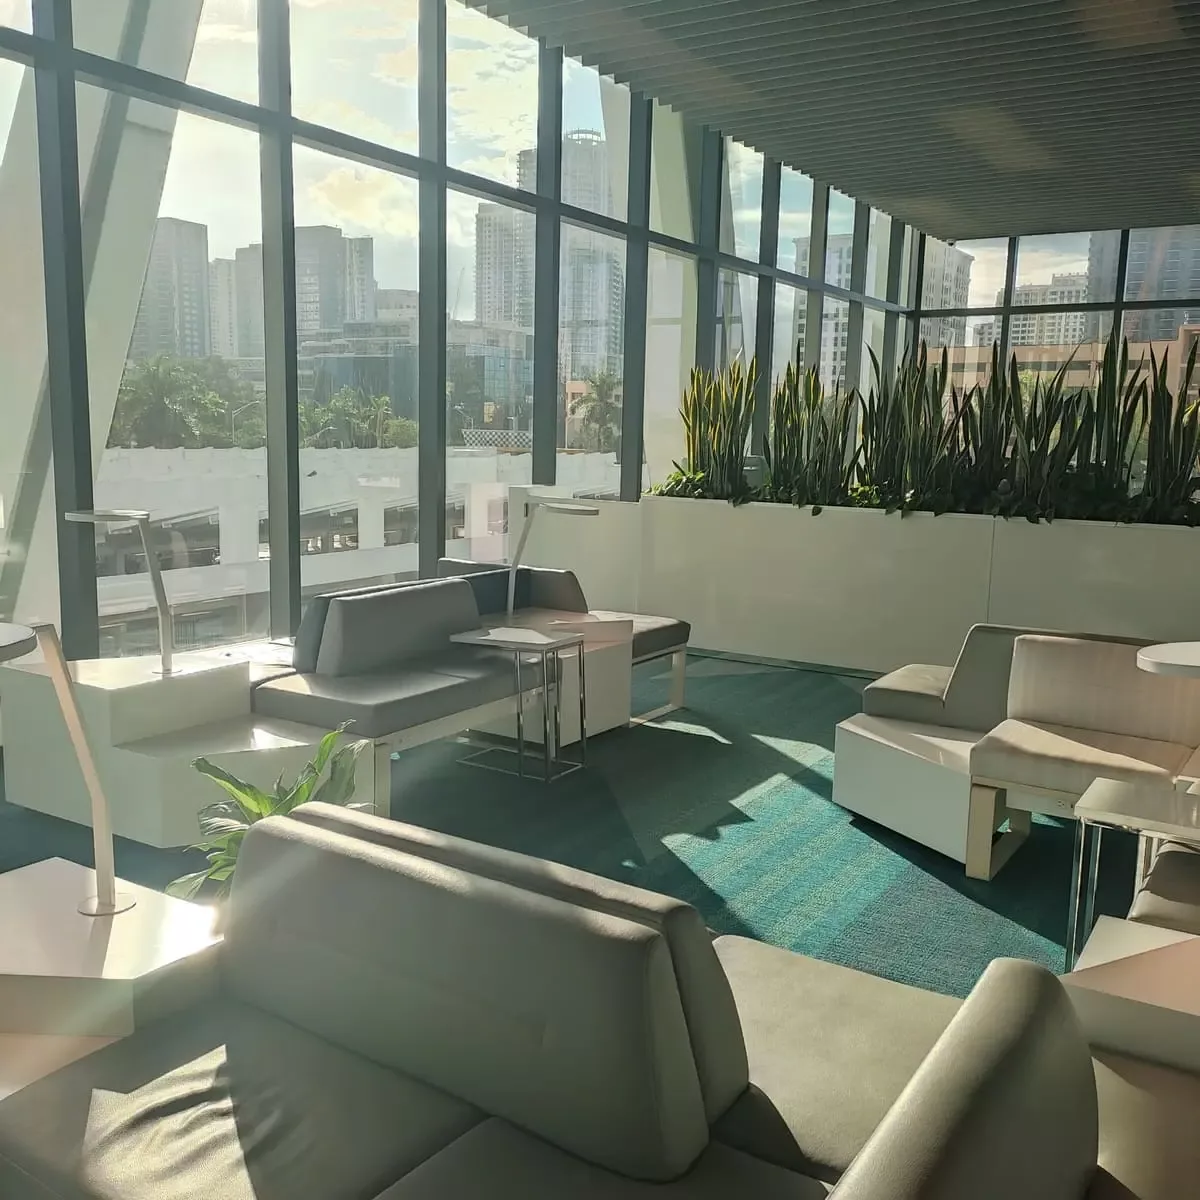 The Smart waiting lounge is quite plush and offers a great view of Fort Lauderdale's skyline through large glass windows